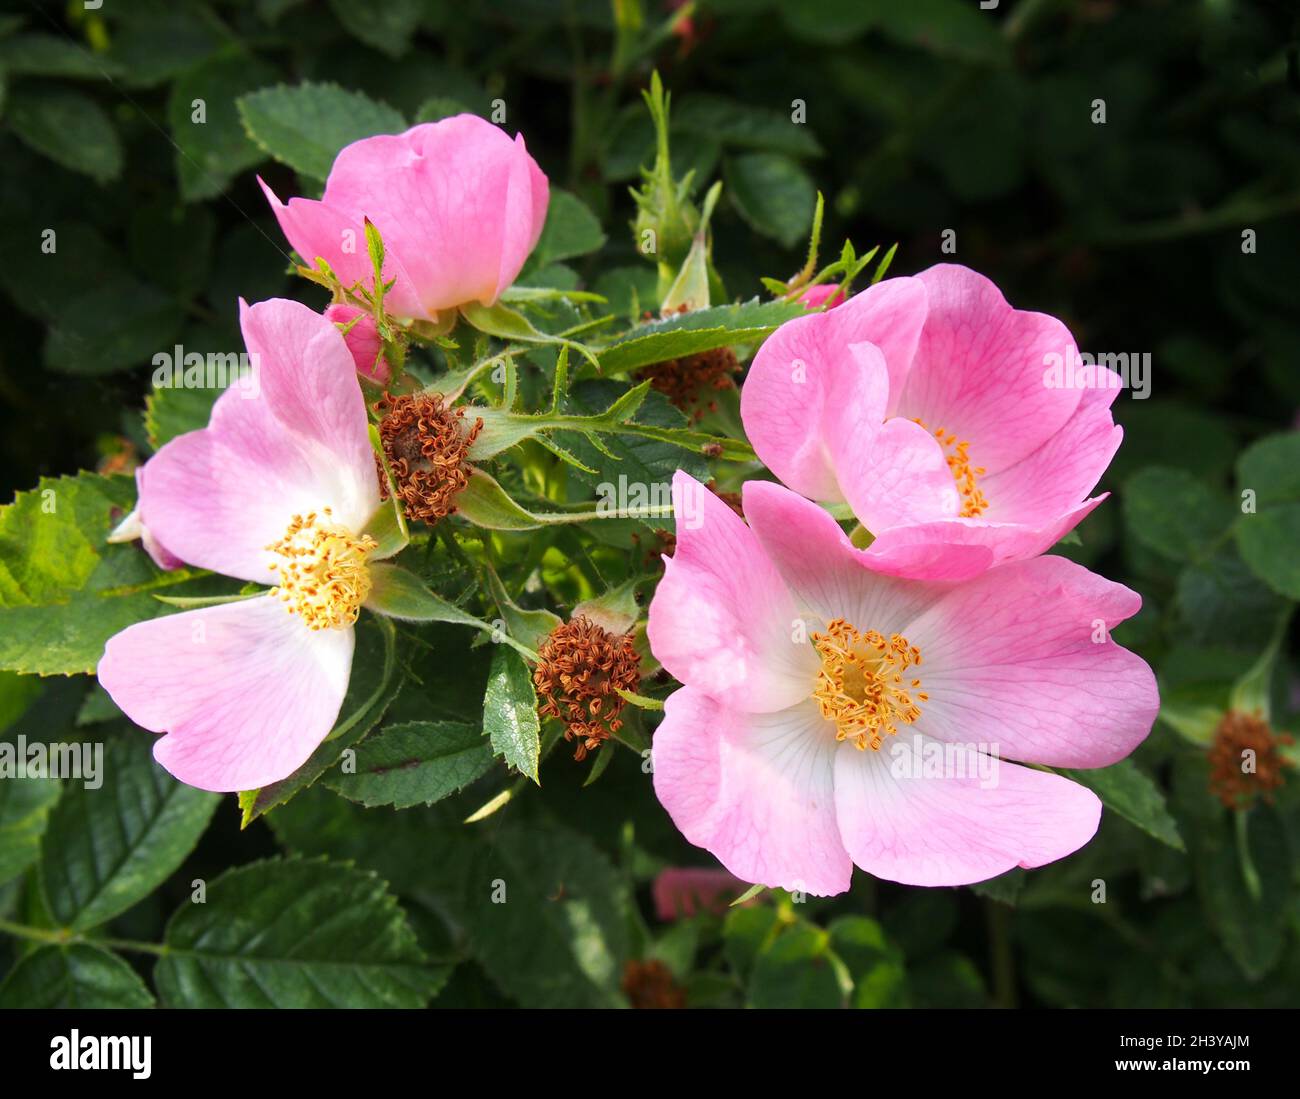 Close up of pink wild rose flowers against a dark green foliage background Stock Photo